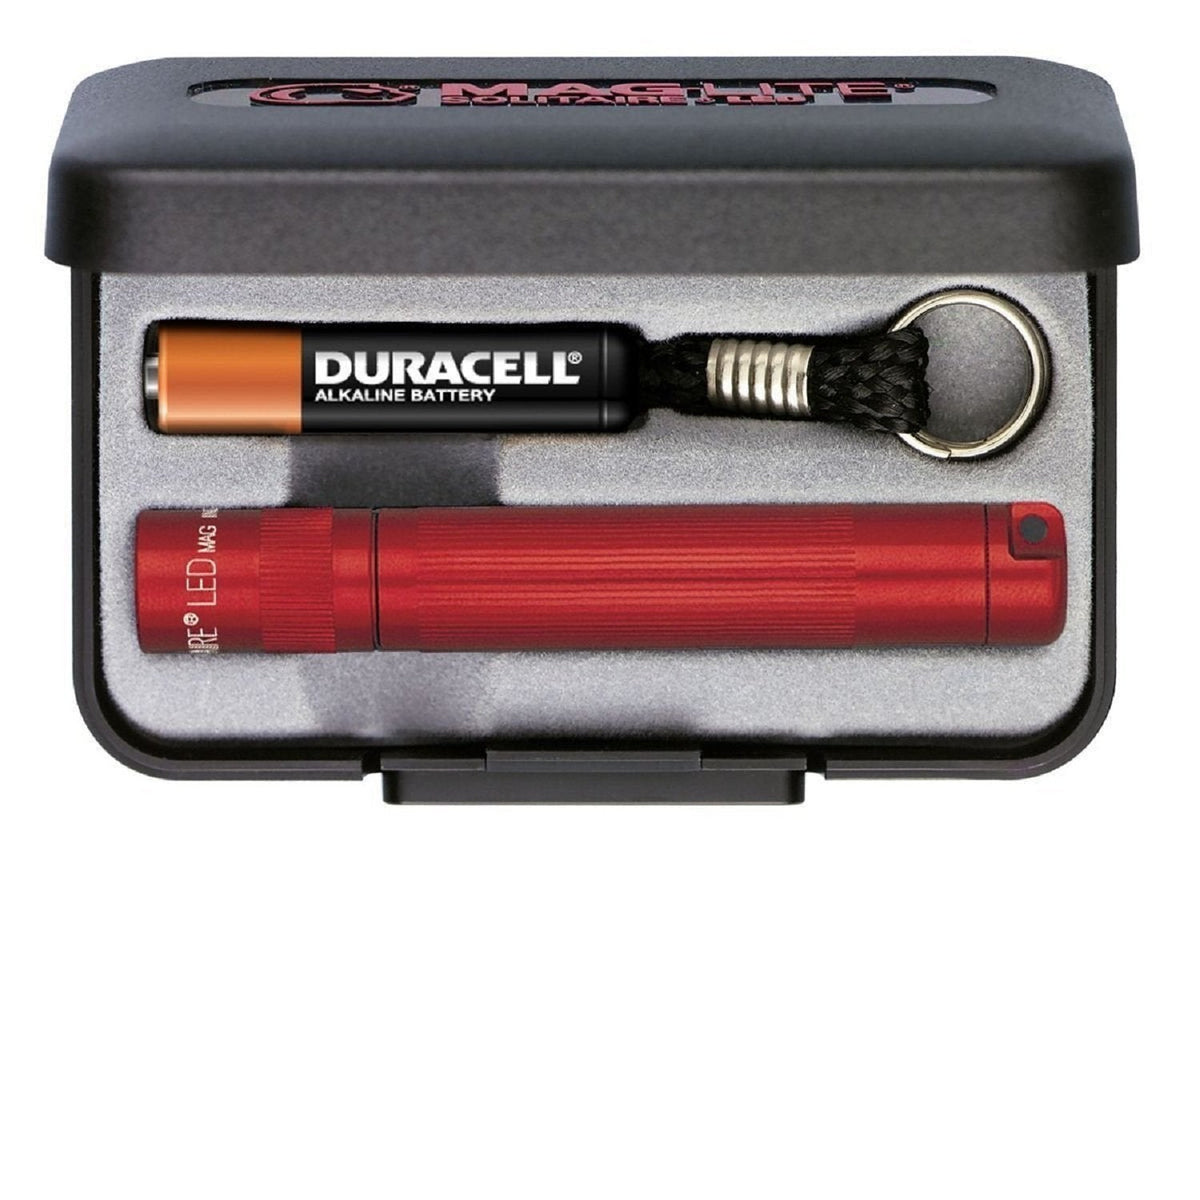 MagLite Solitaire LED AAA Flashlight Presentation Box Red Flashlights and Lighting Maglite Tactical Gear Supplier Tactical Distributors Australia